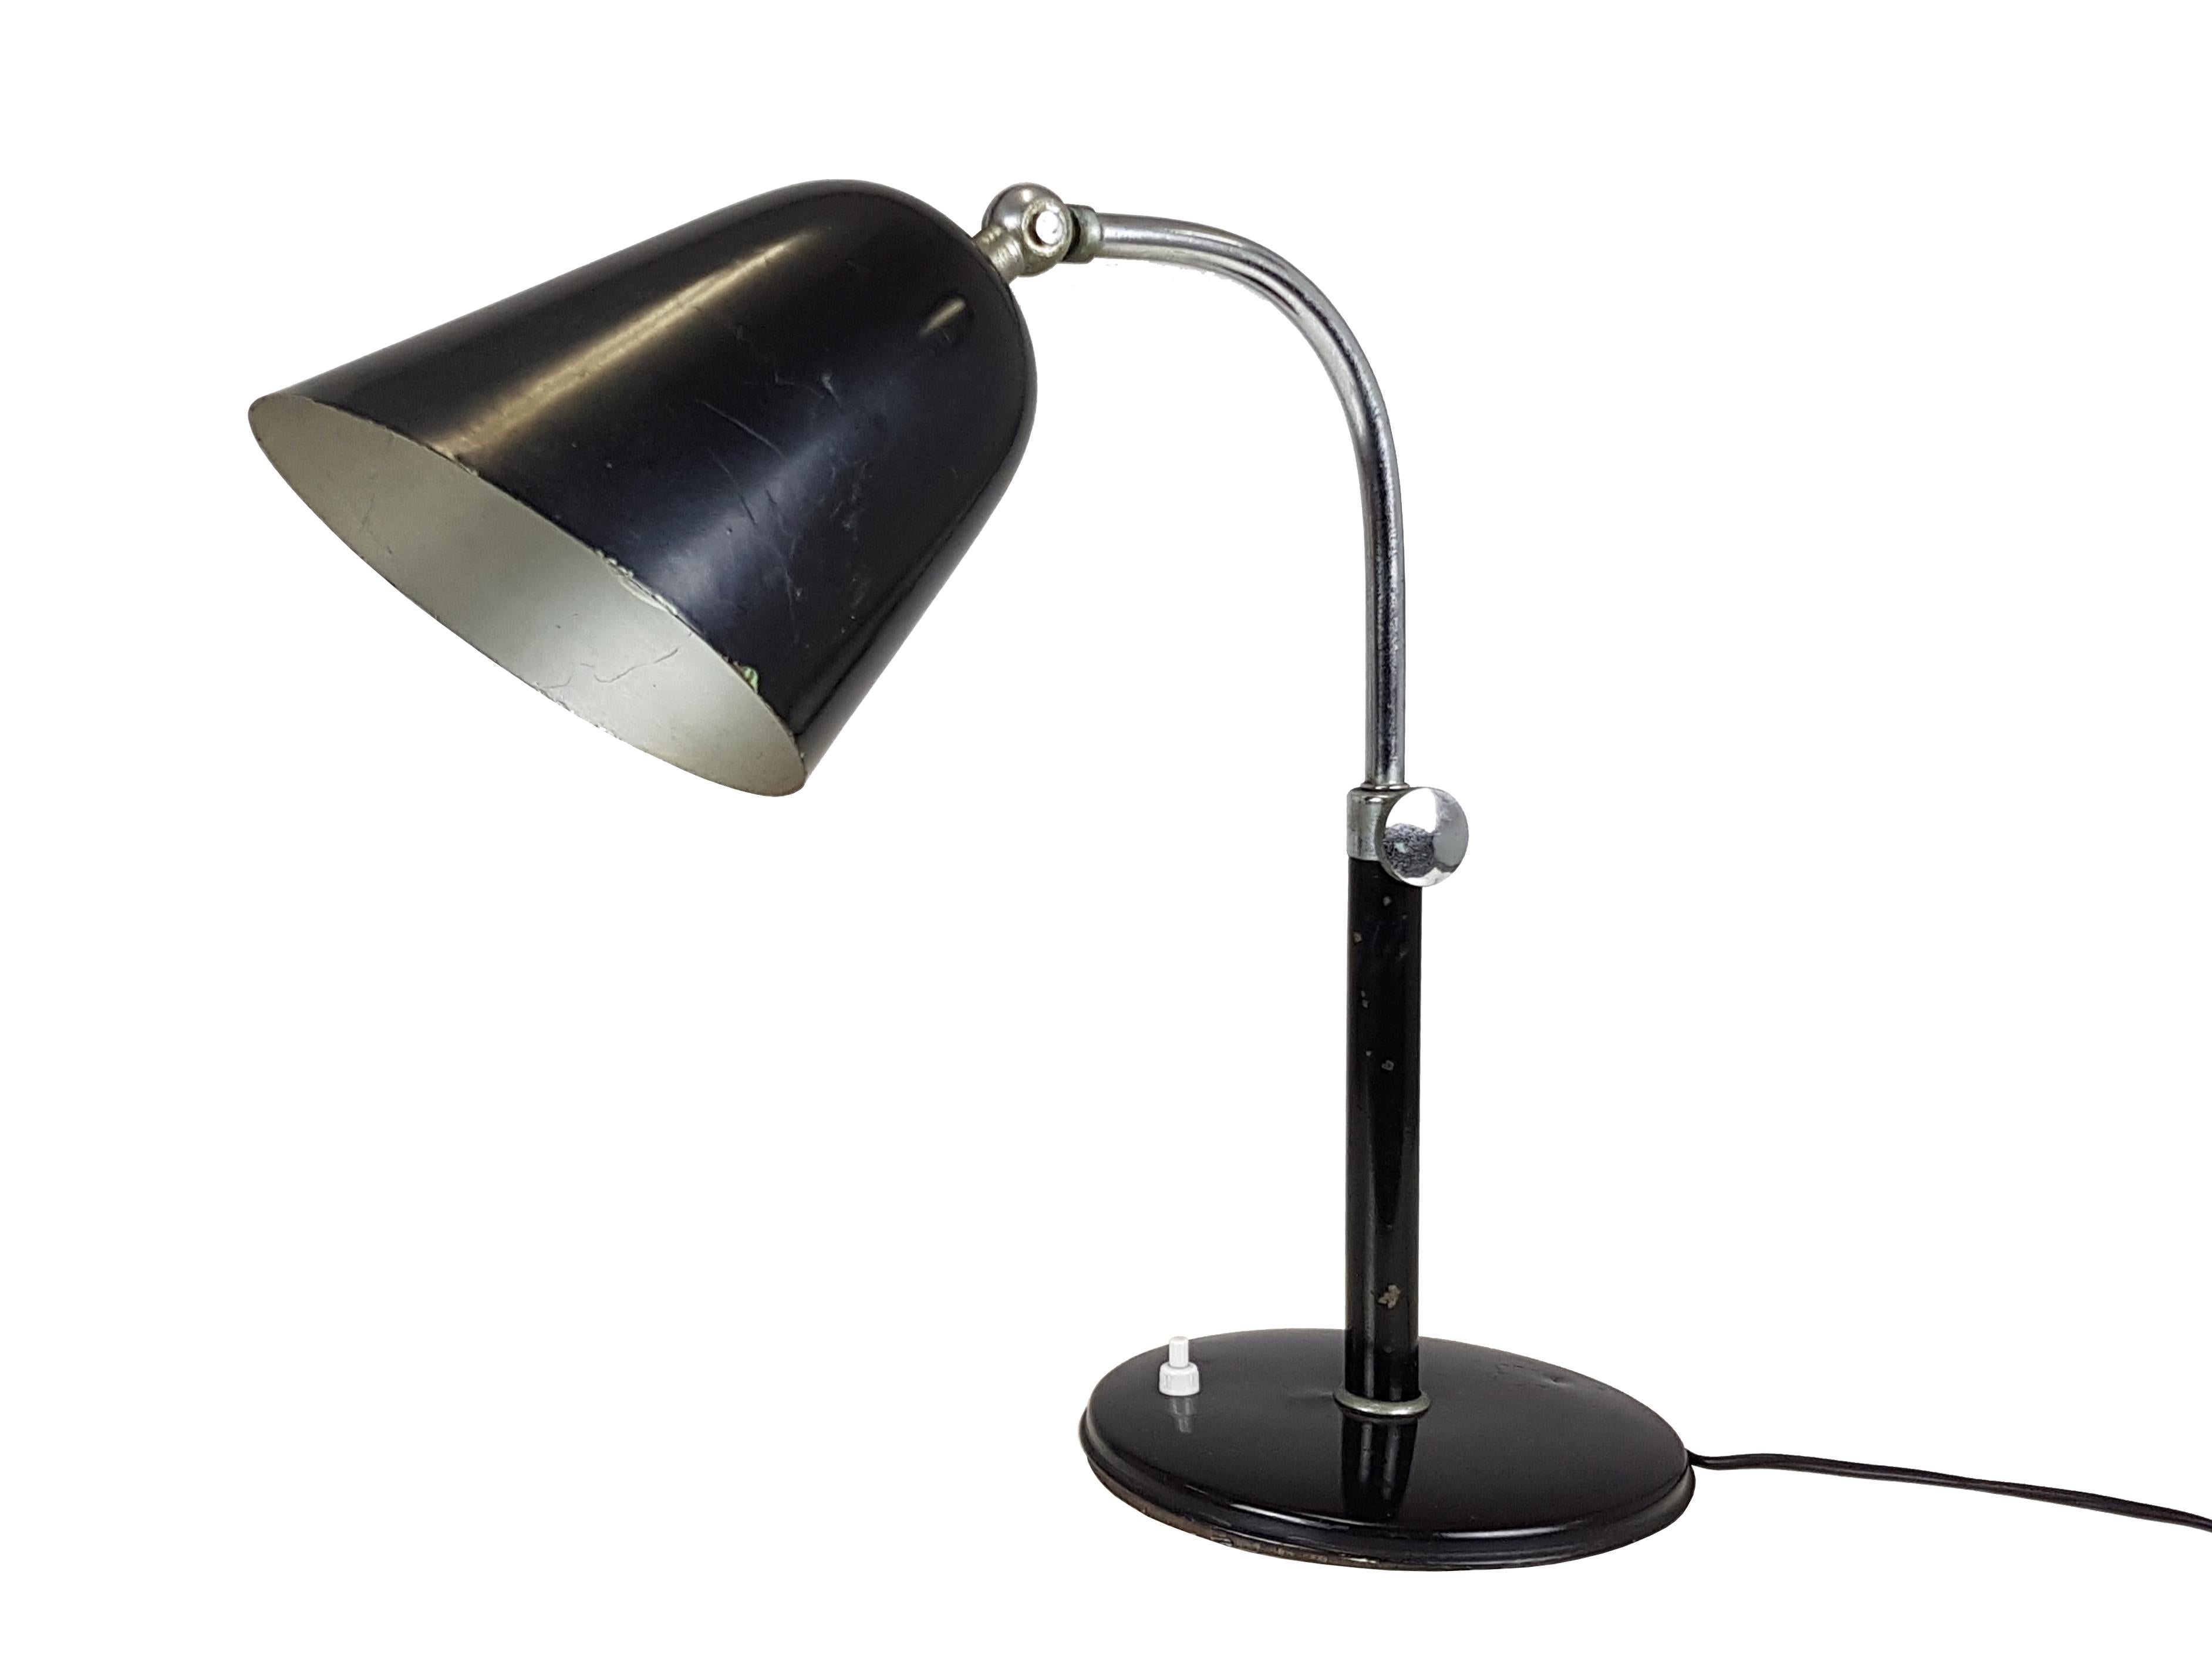 Rare rationalist table lamp by italian designer Ignazio Gardella, produced in Italy around 1940; this product belongs to the period preceding the Famous Azucena furniture company.
Adjustable height. (cm 40 - 47 ).
The lamp remains in a pretty good